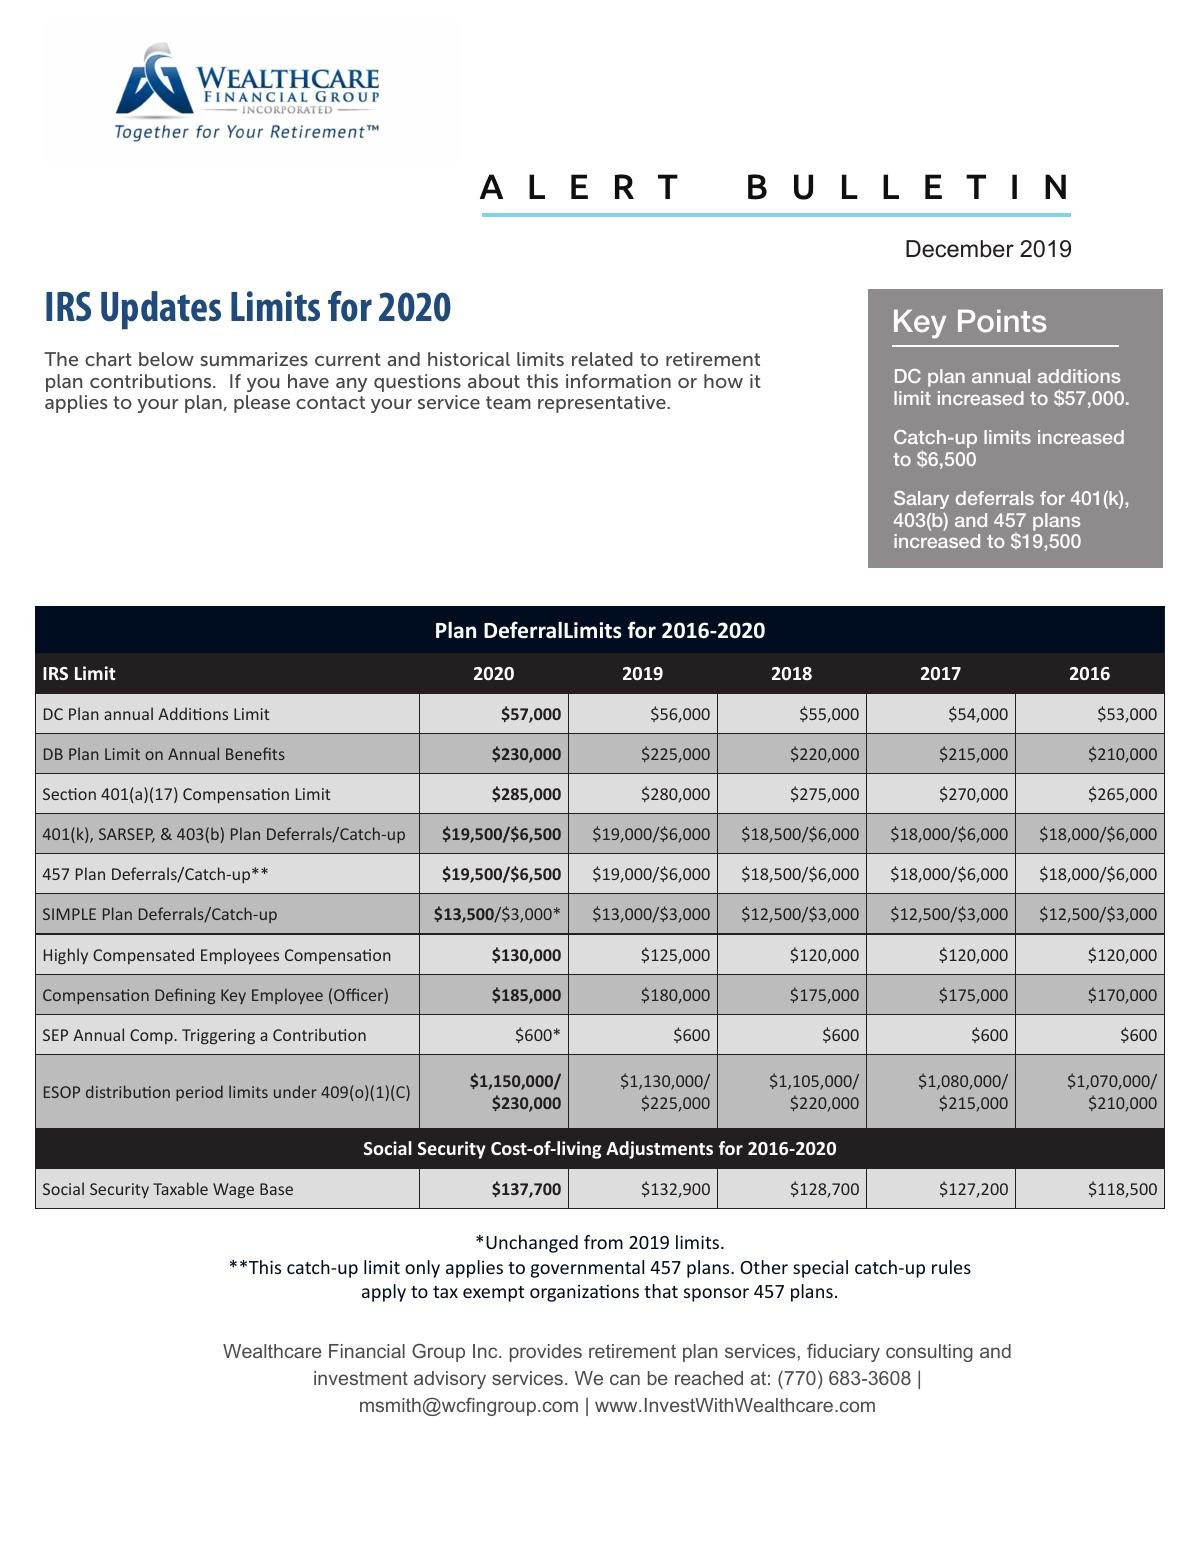 IRS Updates COLA Limits for 2020